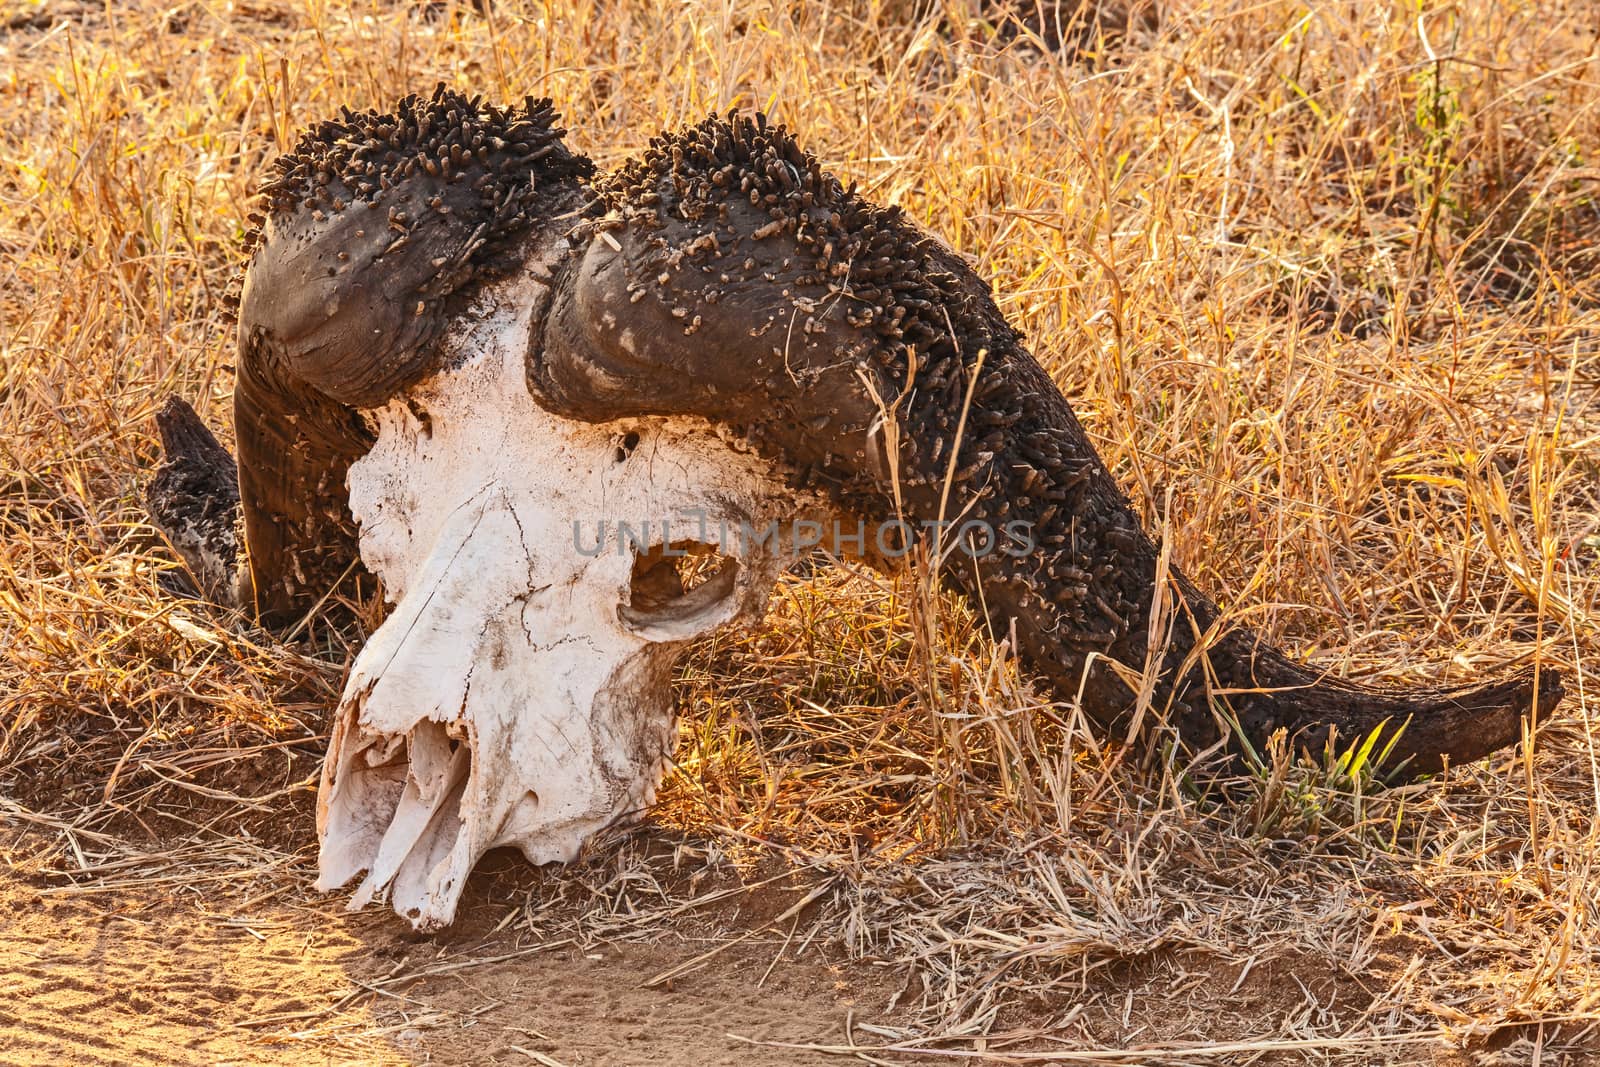 Skull of the Cape Buffalo (Syncerus caffer) photographed in Kruger National Park. South Africa.